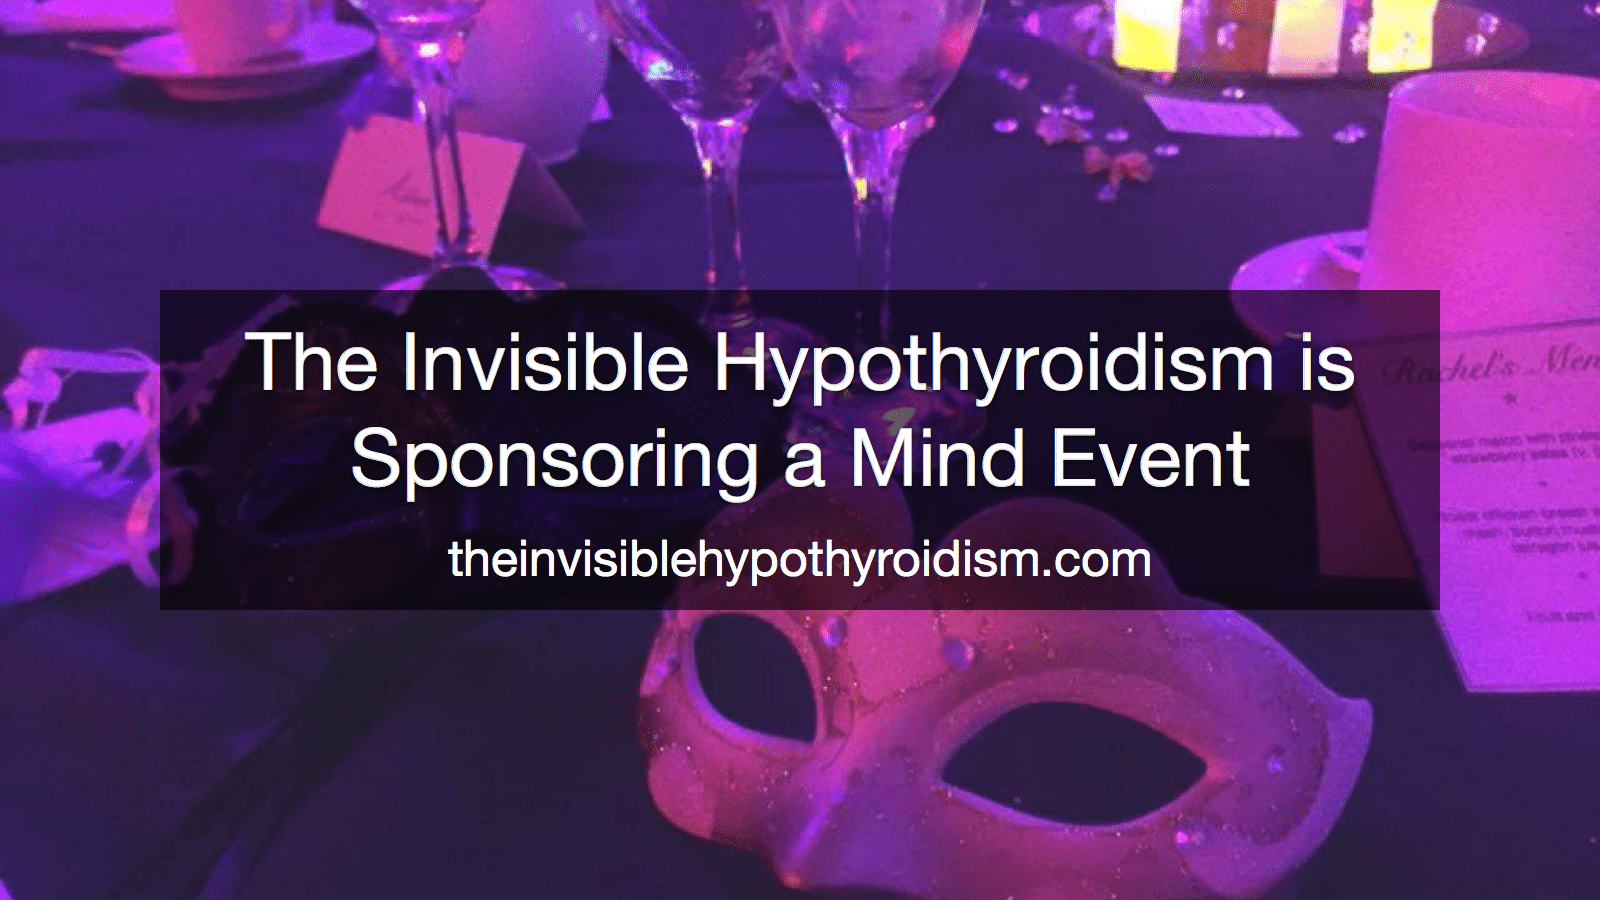 The Invisible Hypothyroidism is Sponsoring a Mind Event